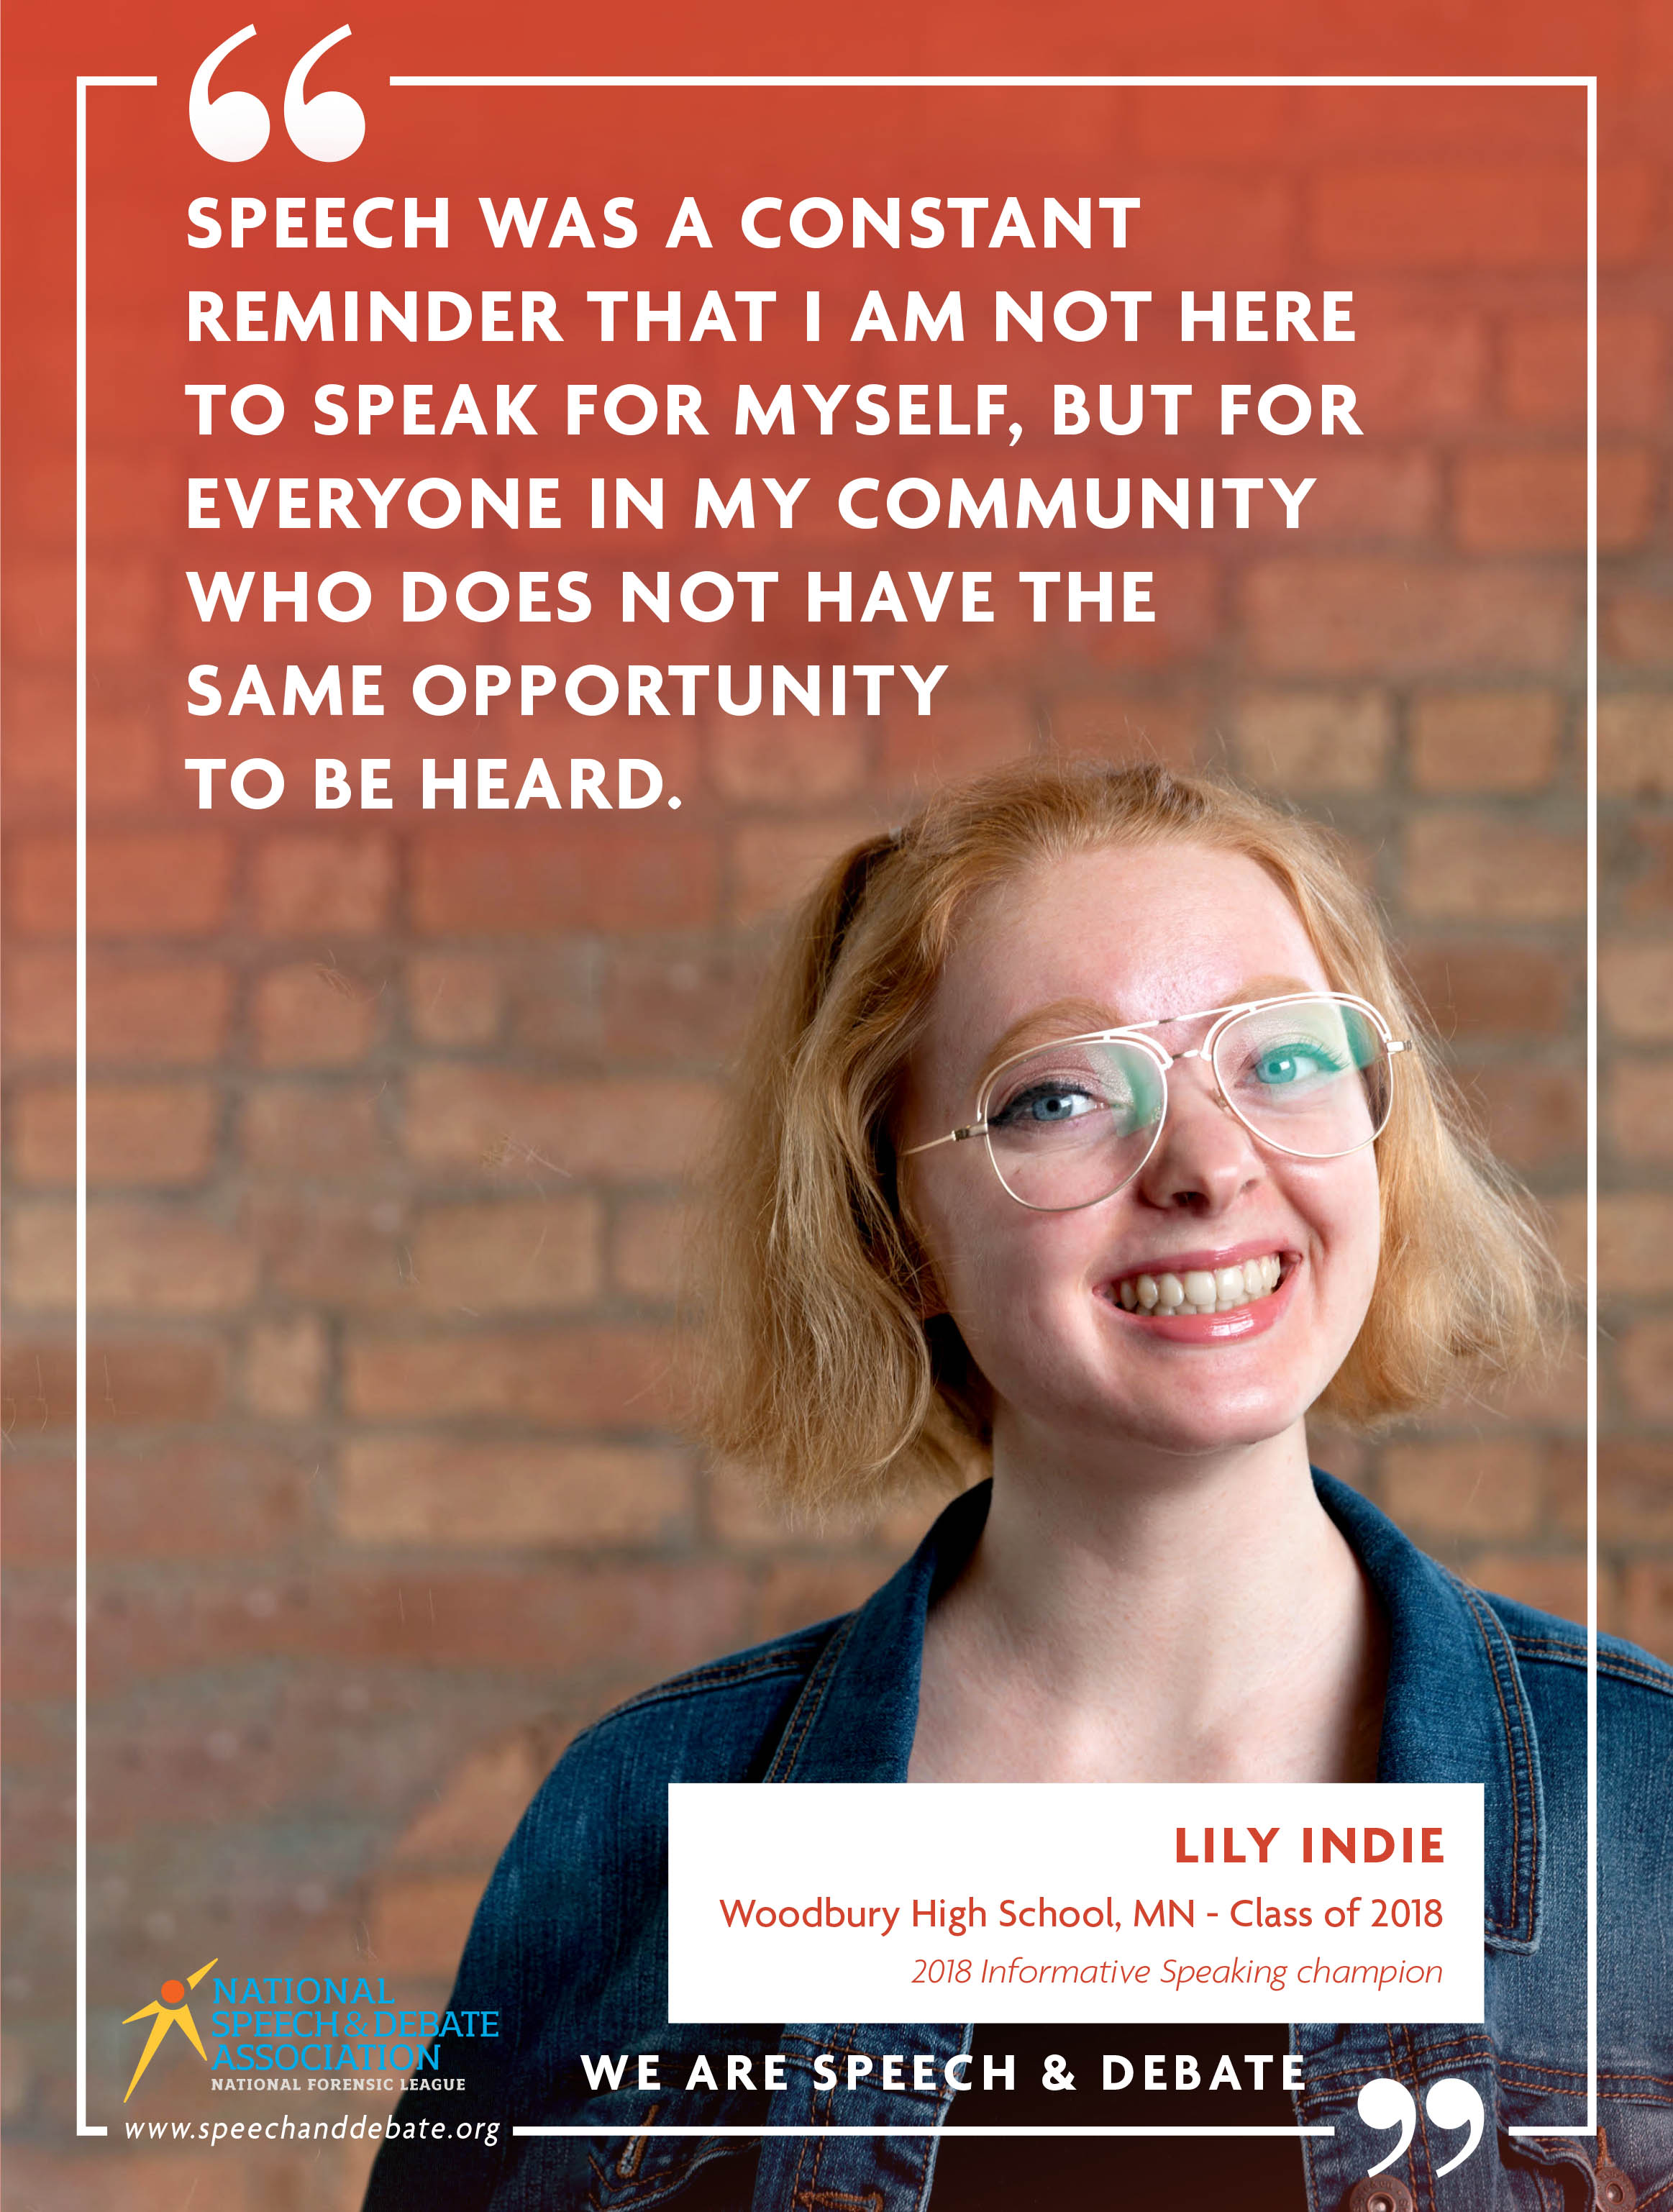 "SPEECH WAS A CONSTANT REMINDER THAT I AM NOT HERE TO SPEAK FOR MYSELF, BUT FOR EVERYONE IN MY COMMUNITY WHO DOES NOT HAVE THE SAME OPPORTUNITY TO BE HEARD." - Lily Indie